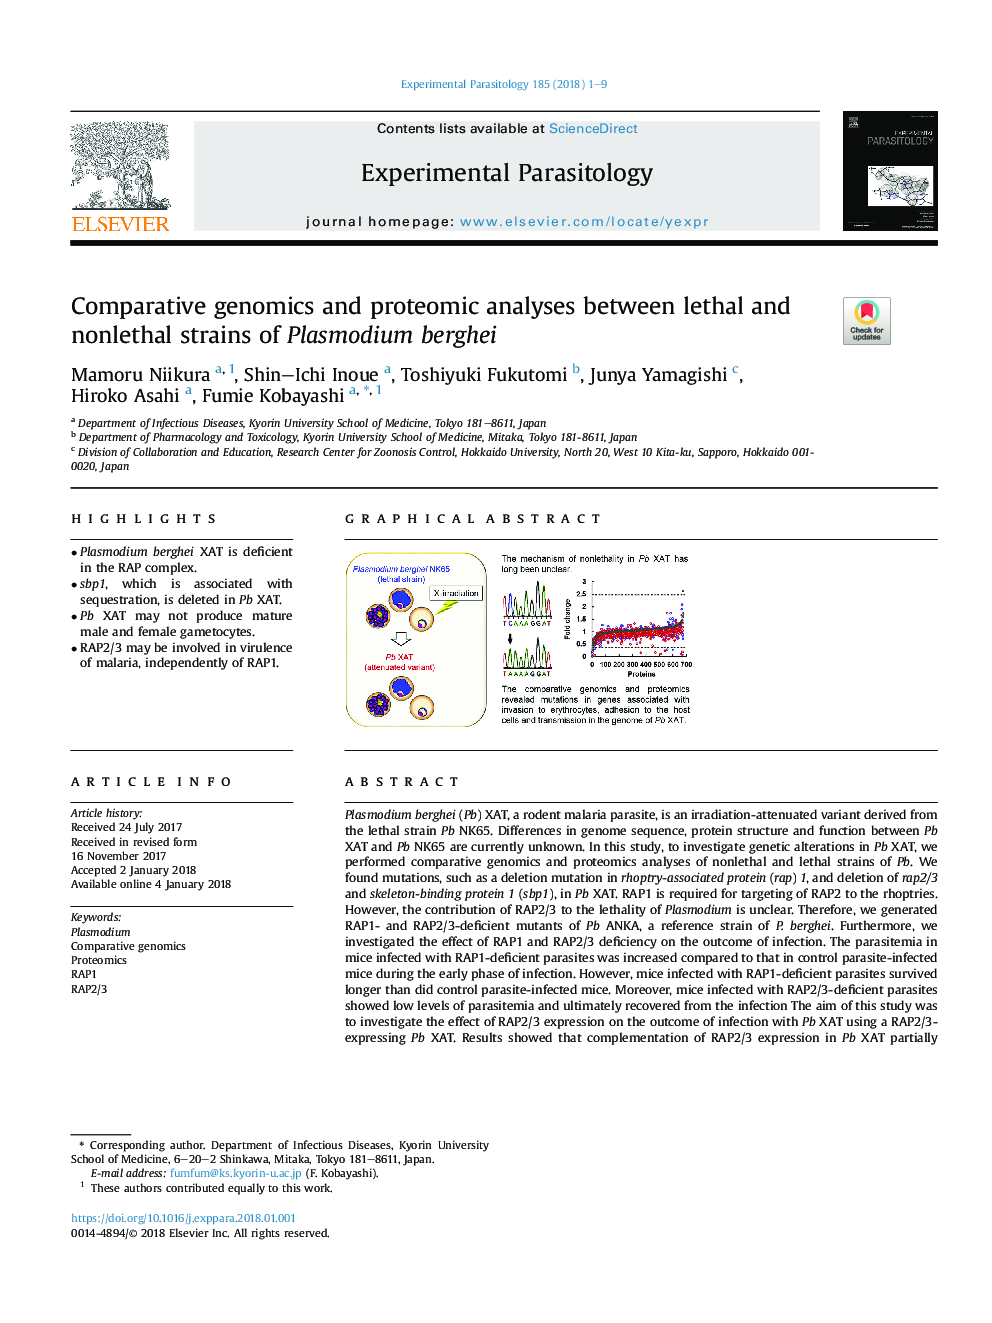 Comparative genomics and proteomic analyses between lethal and nonlethal strains of Plasmodium berghei